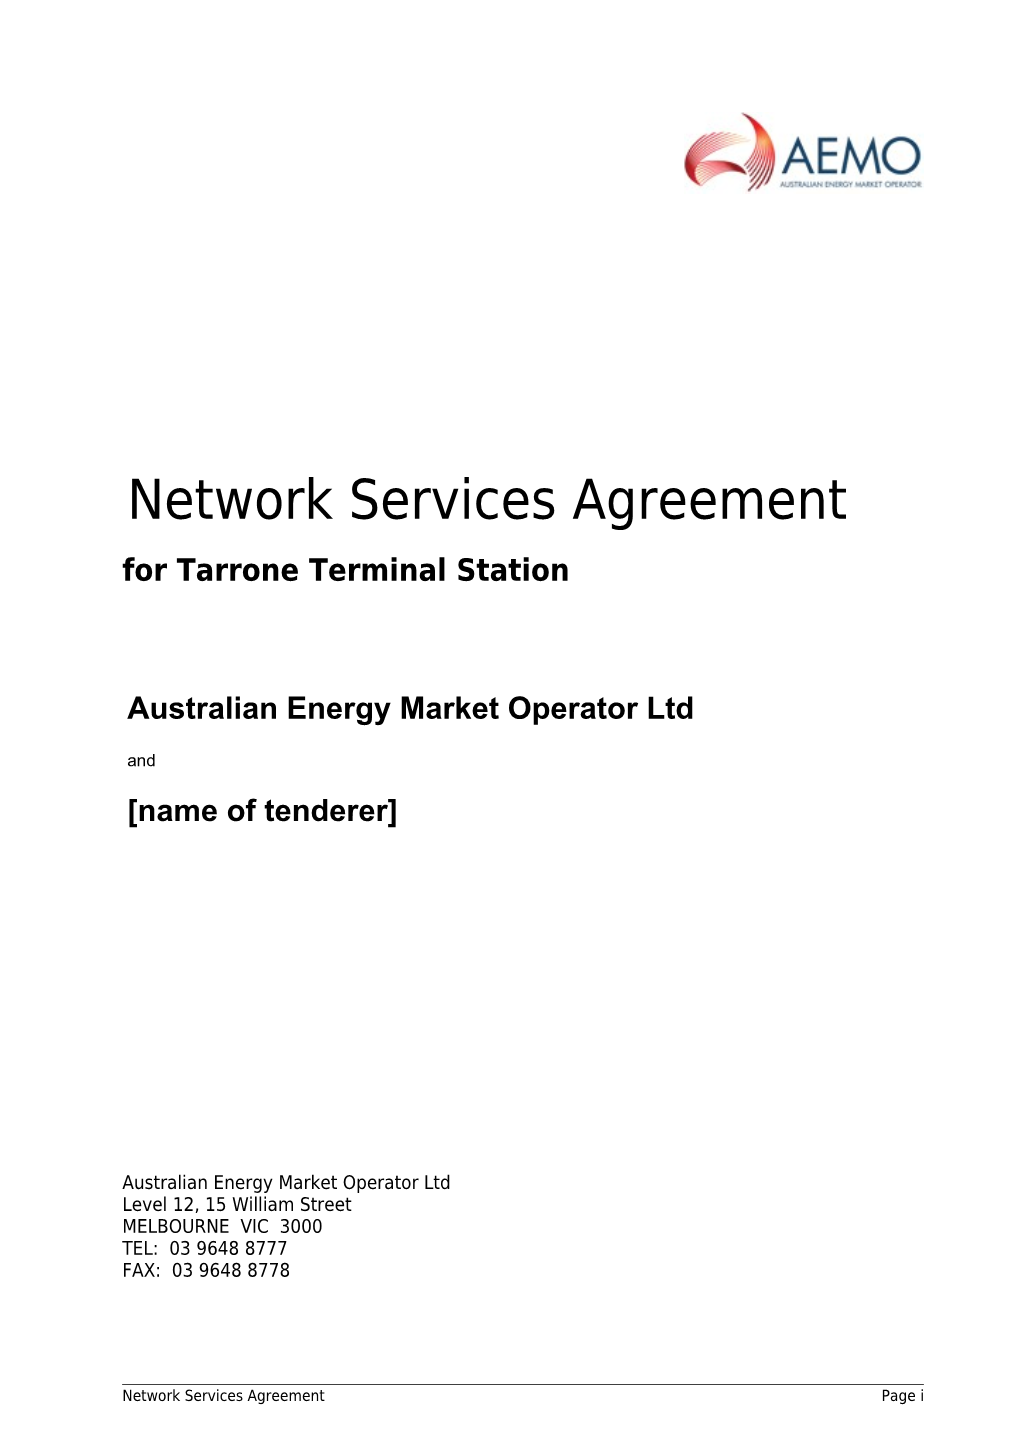 Tender Draft Project Agreement